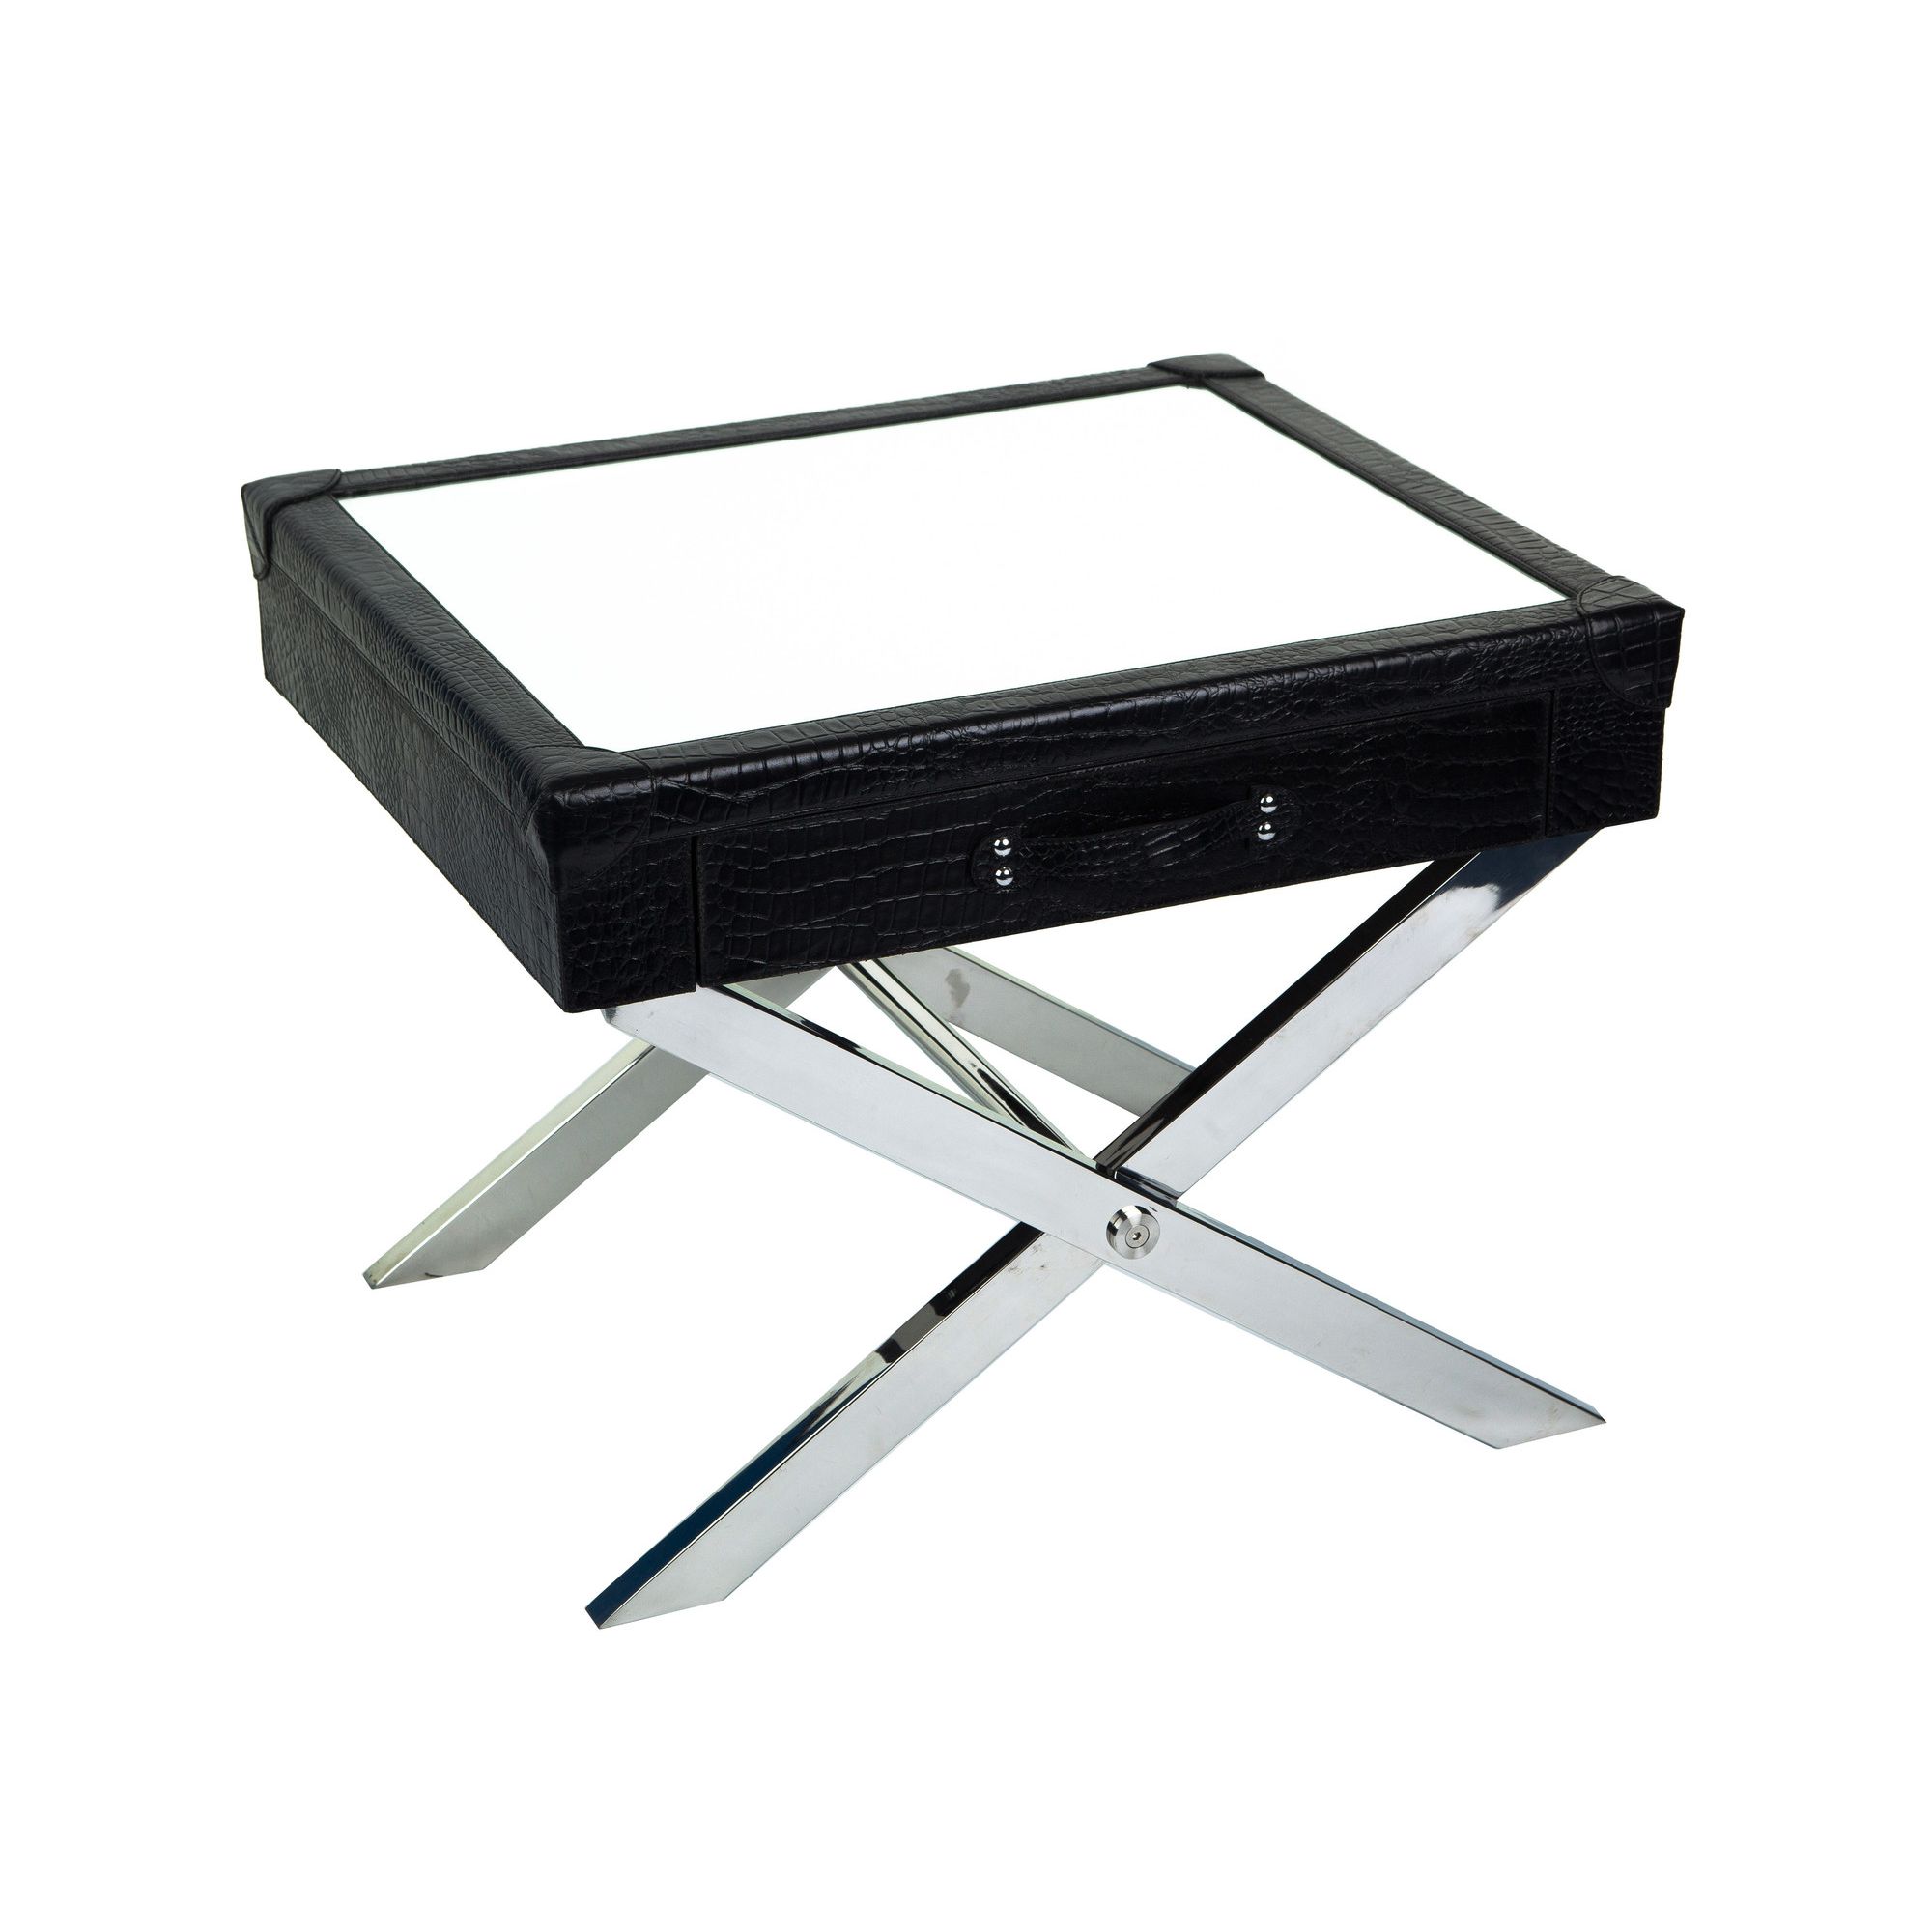 Jadeed Interiors Mirrored Leather Side Table - Black at Tesco Direct